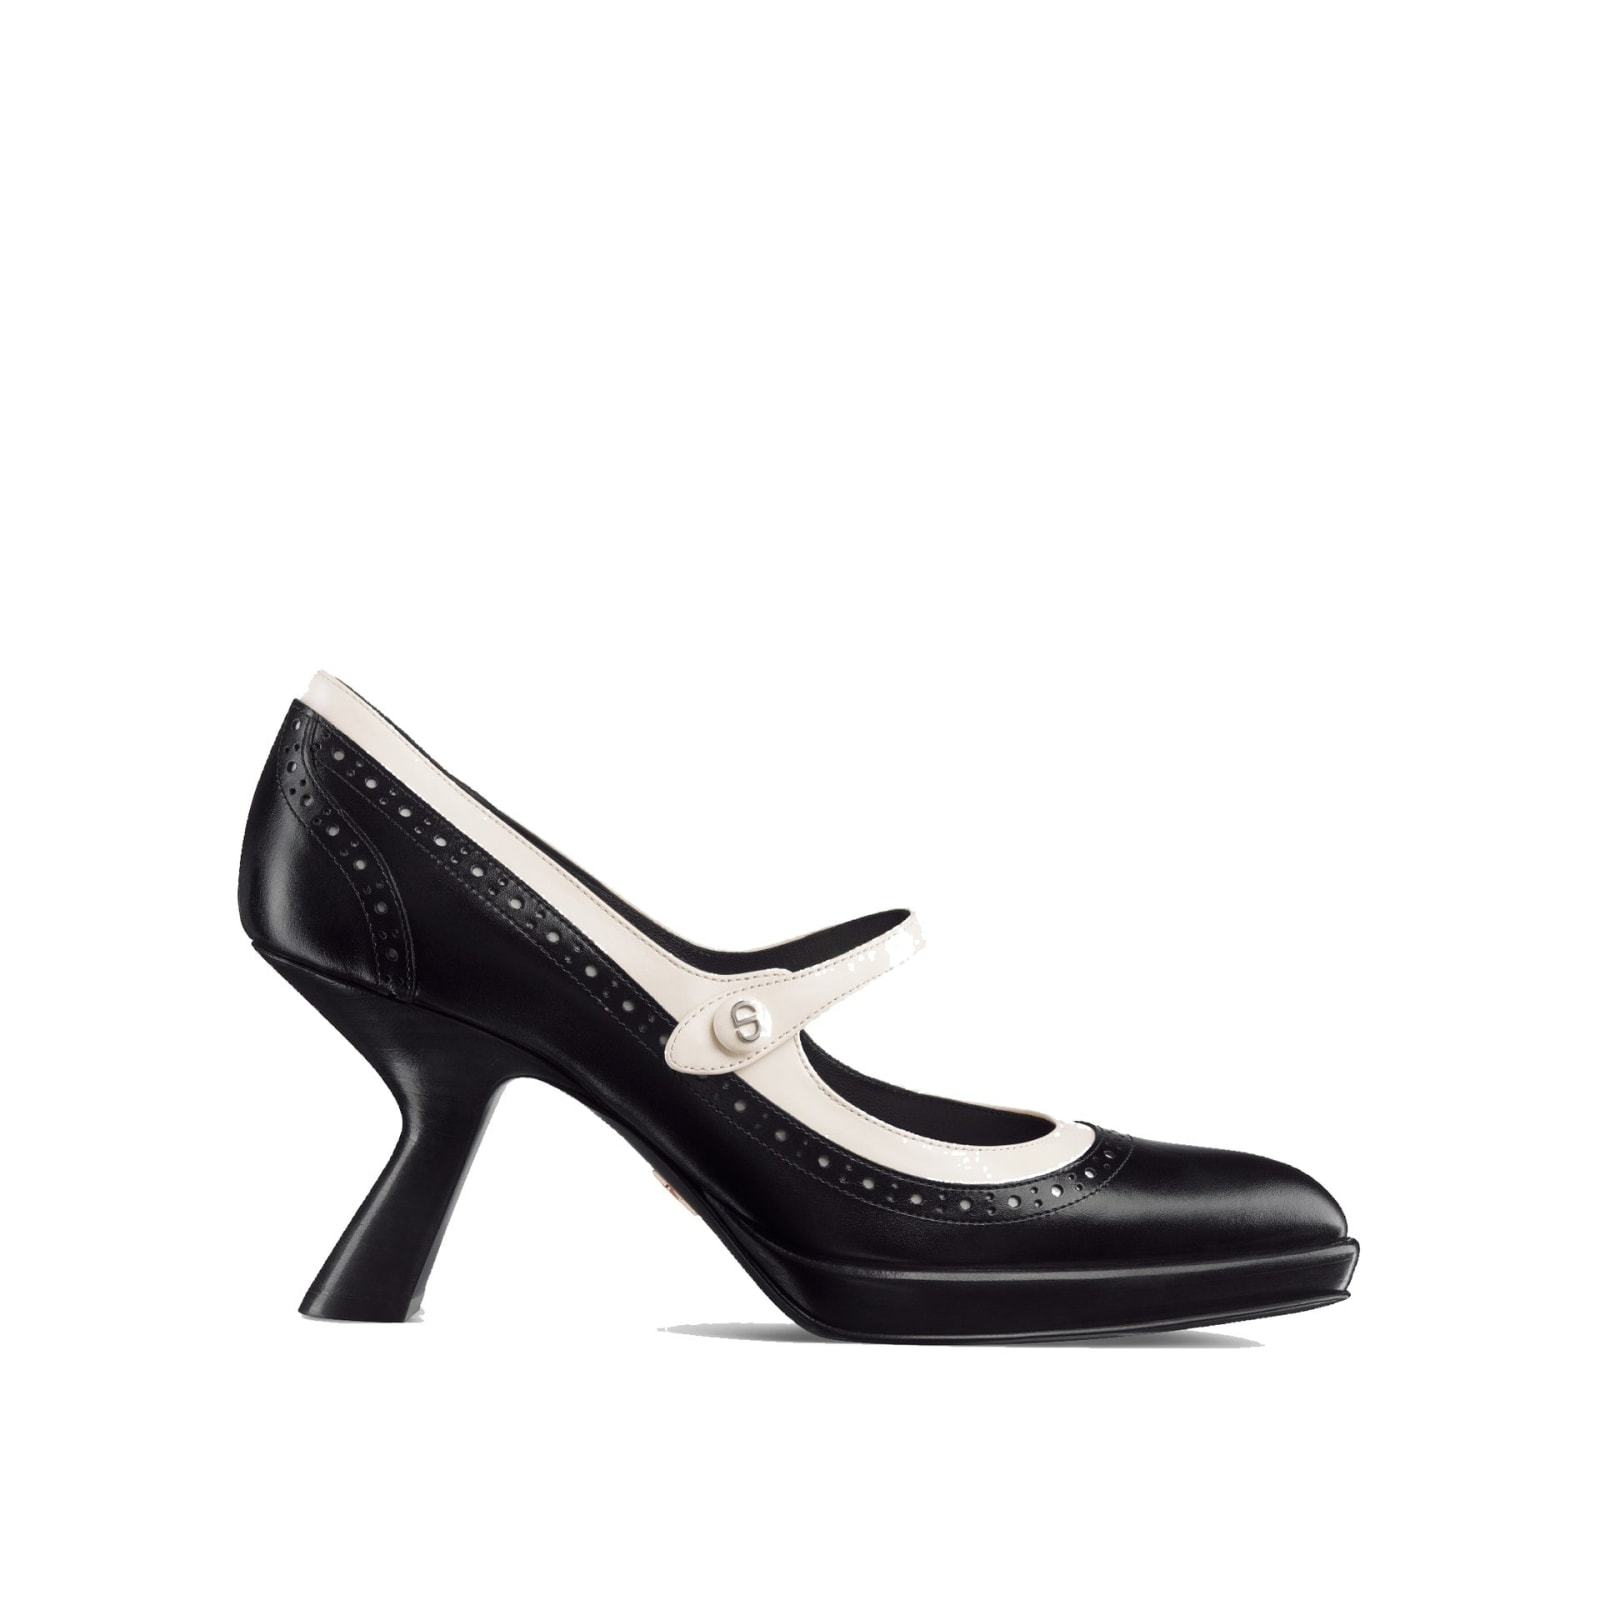 Specta Mary Jane Pumps